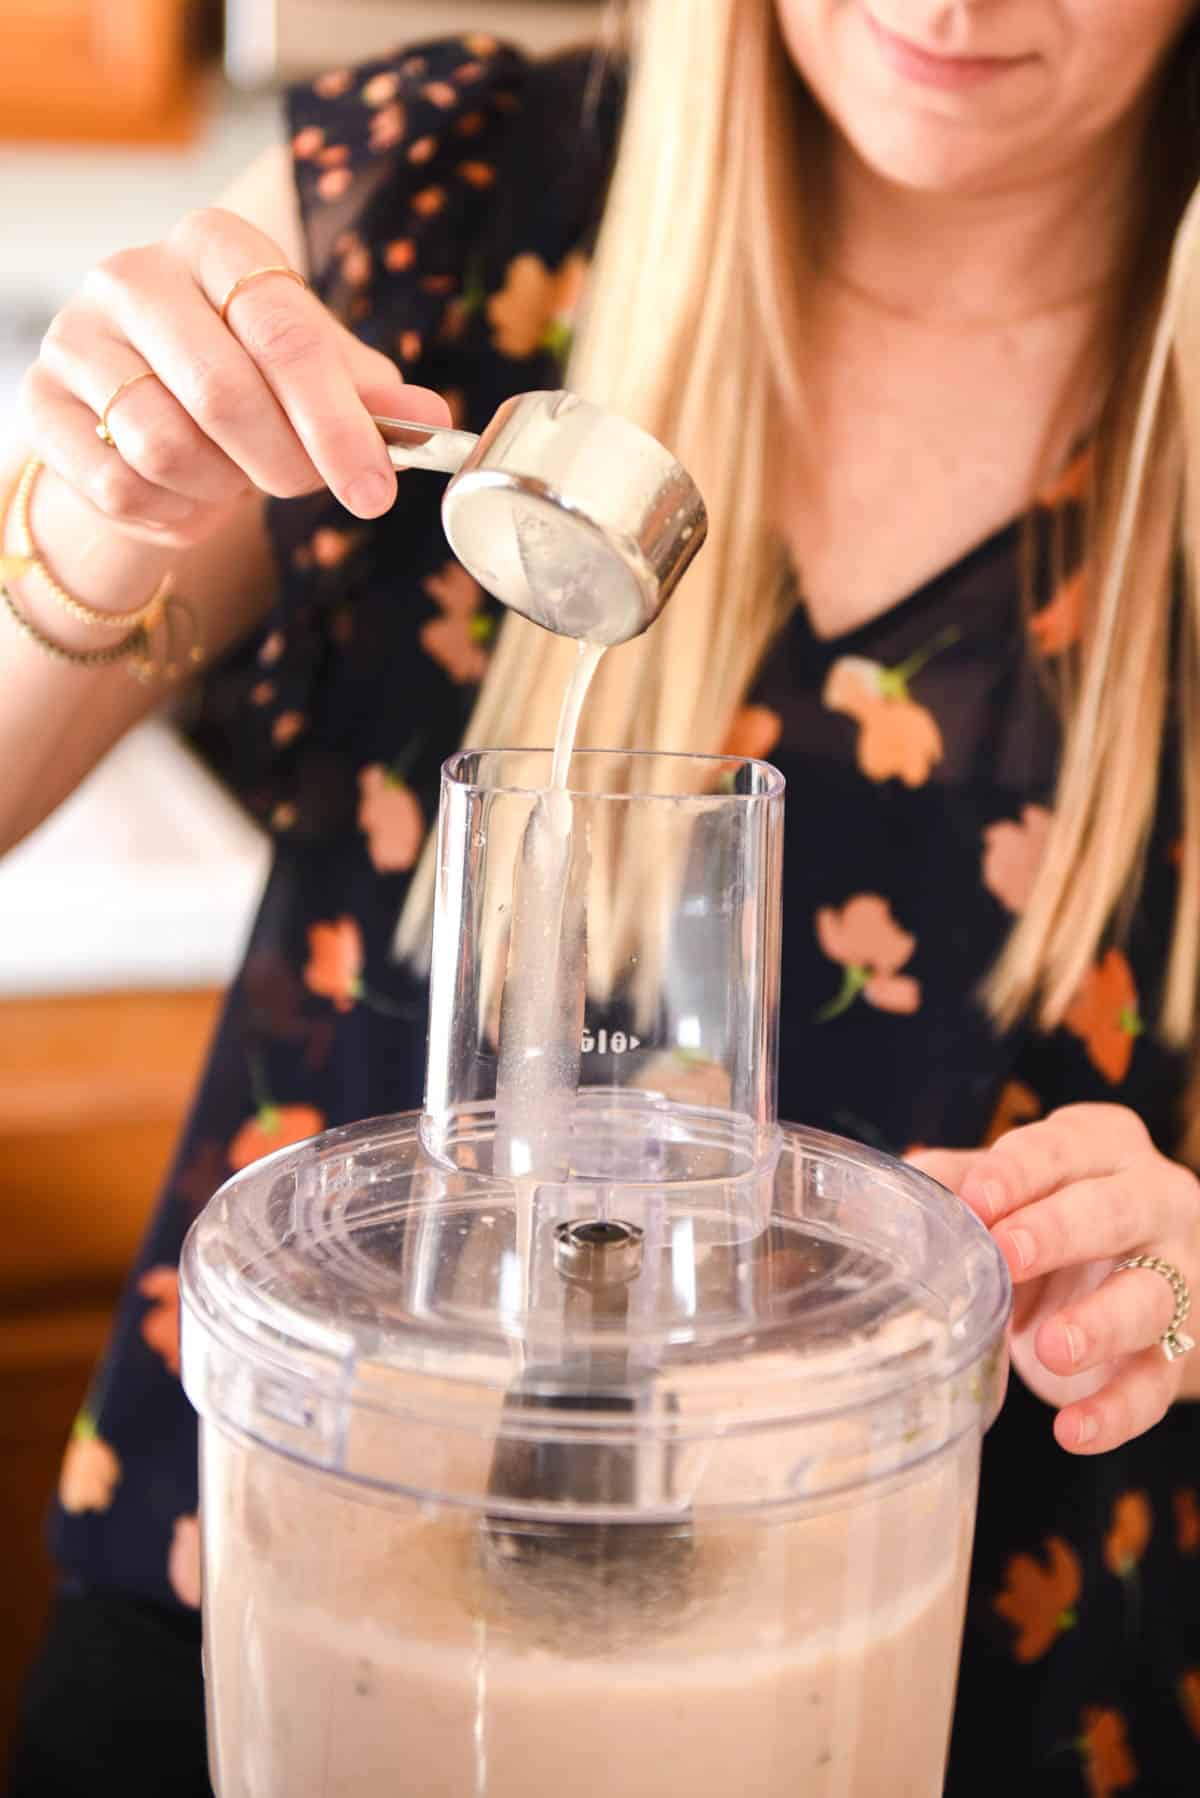 Woman using a measuring cup to add liquid to a food processor.